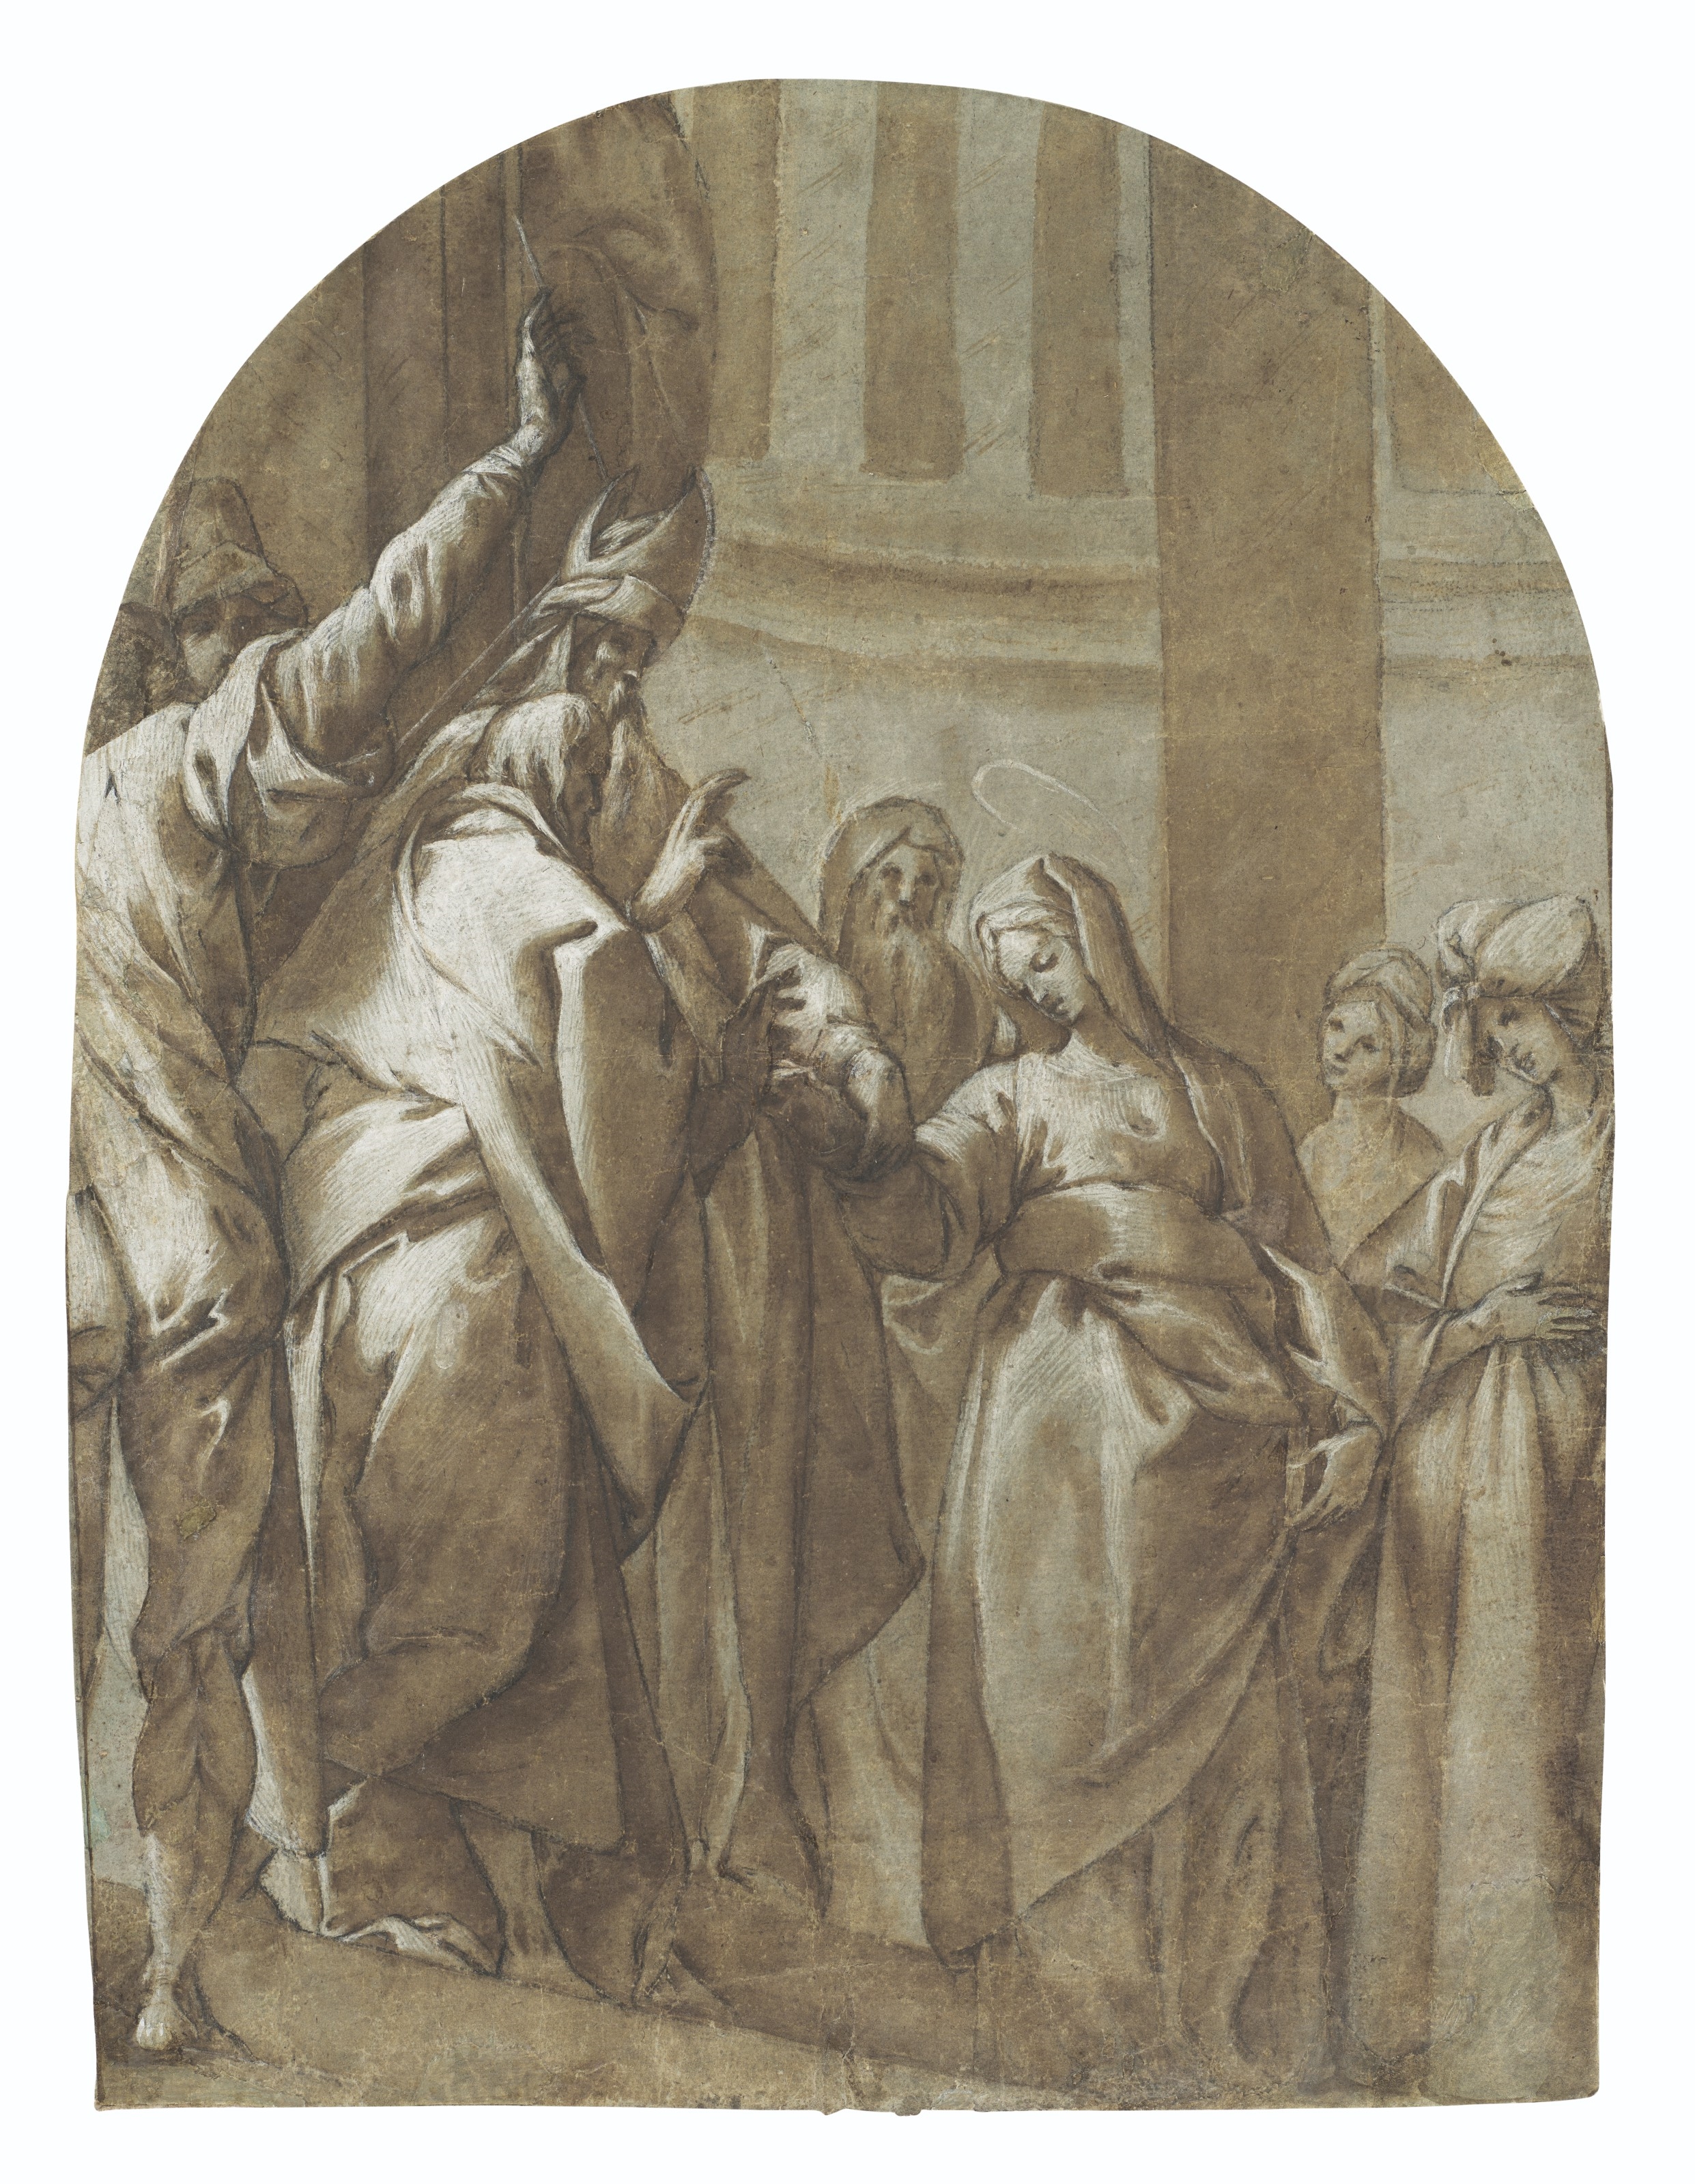 The Betrothal of the Virgin by Morazzone